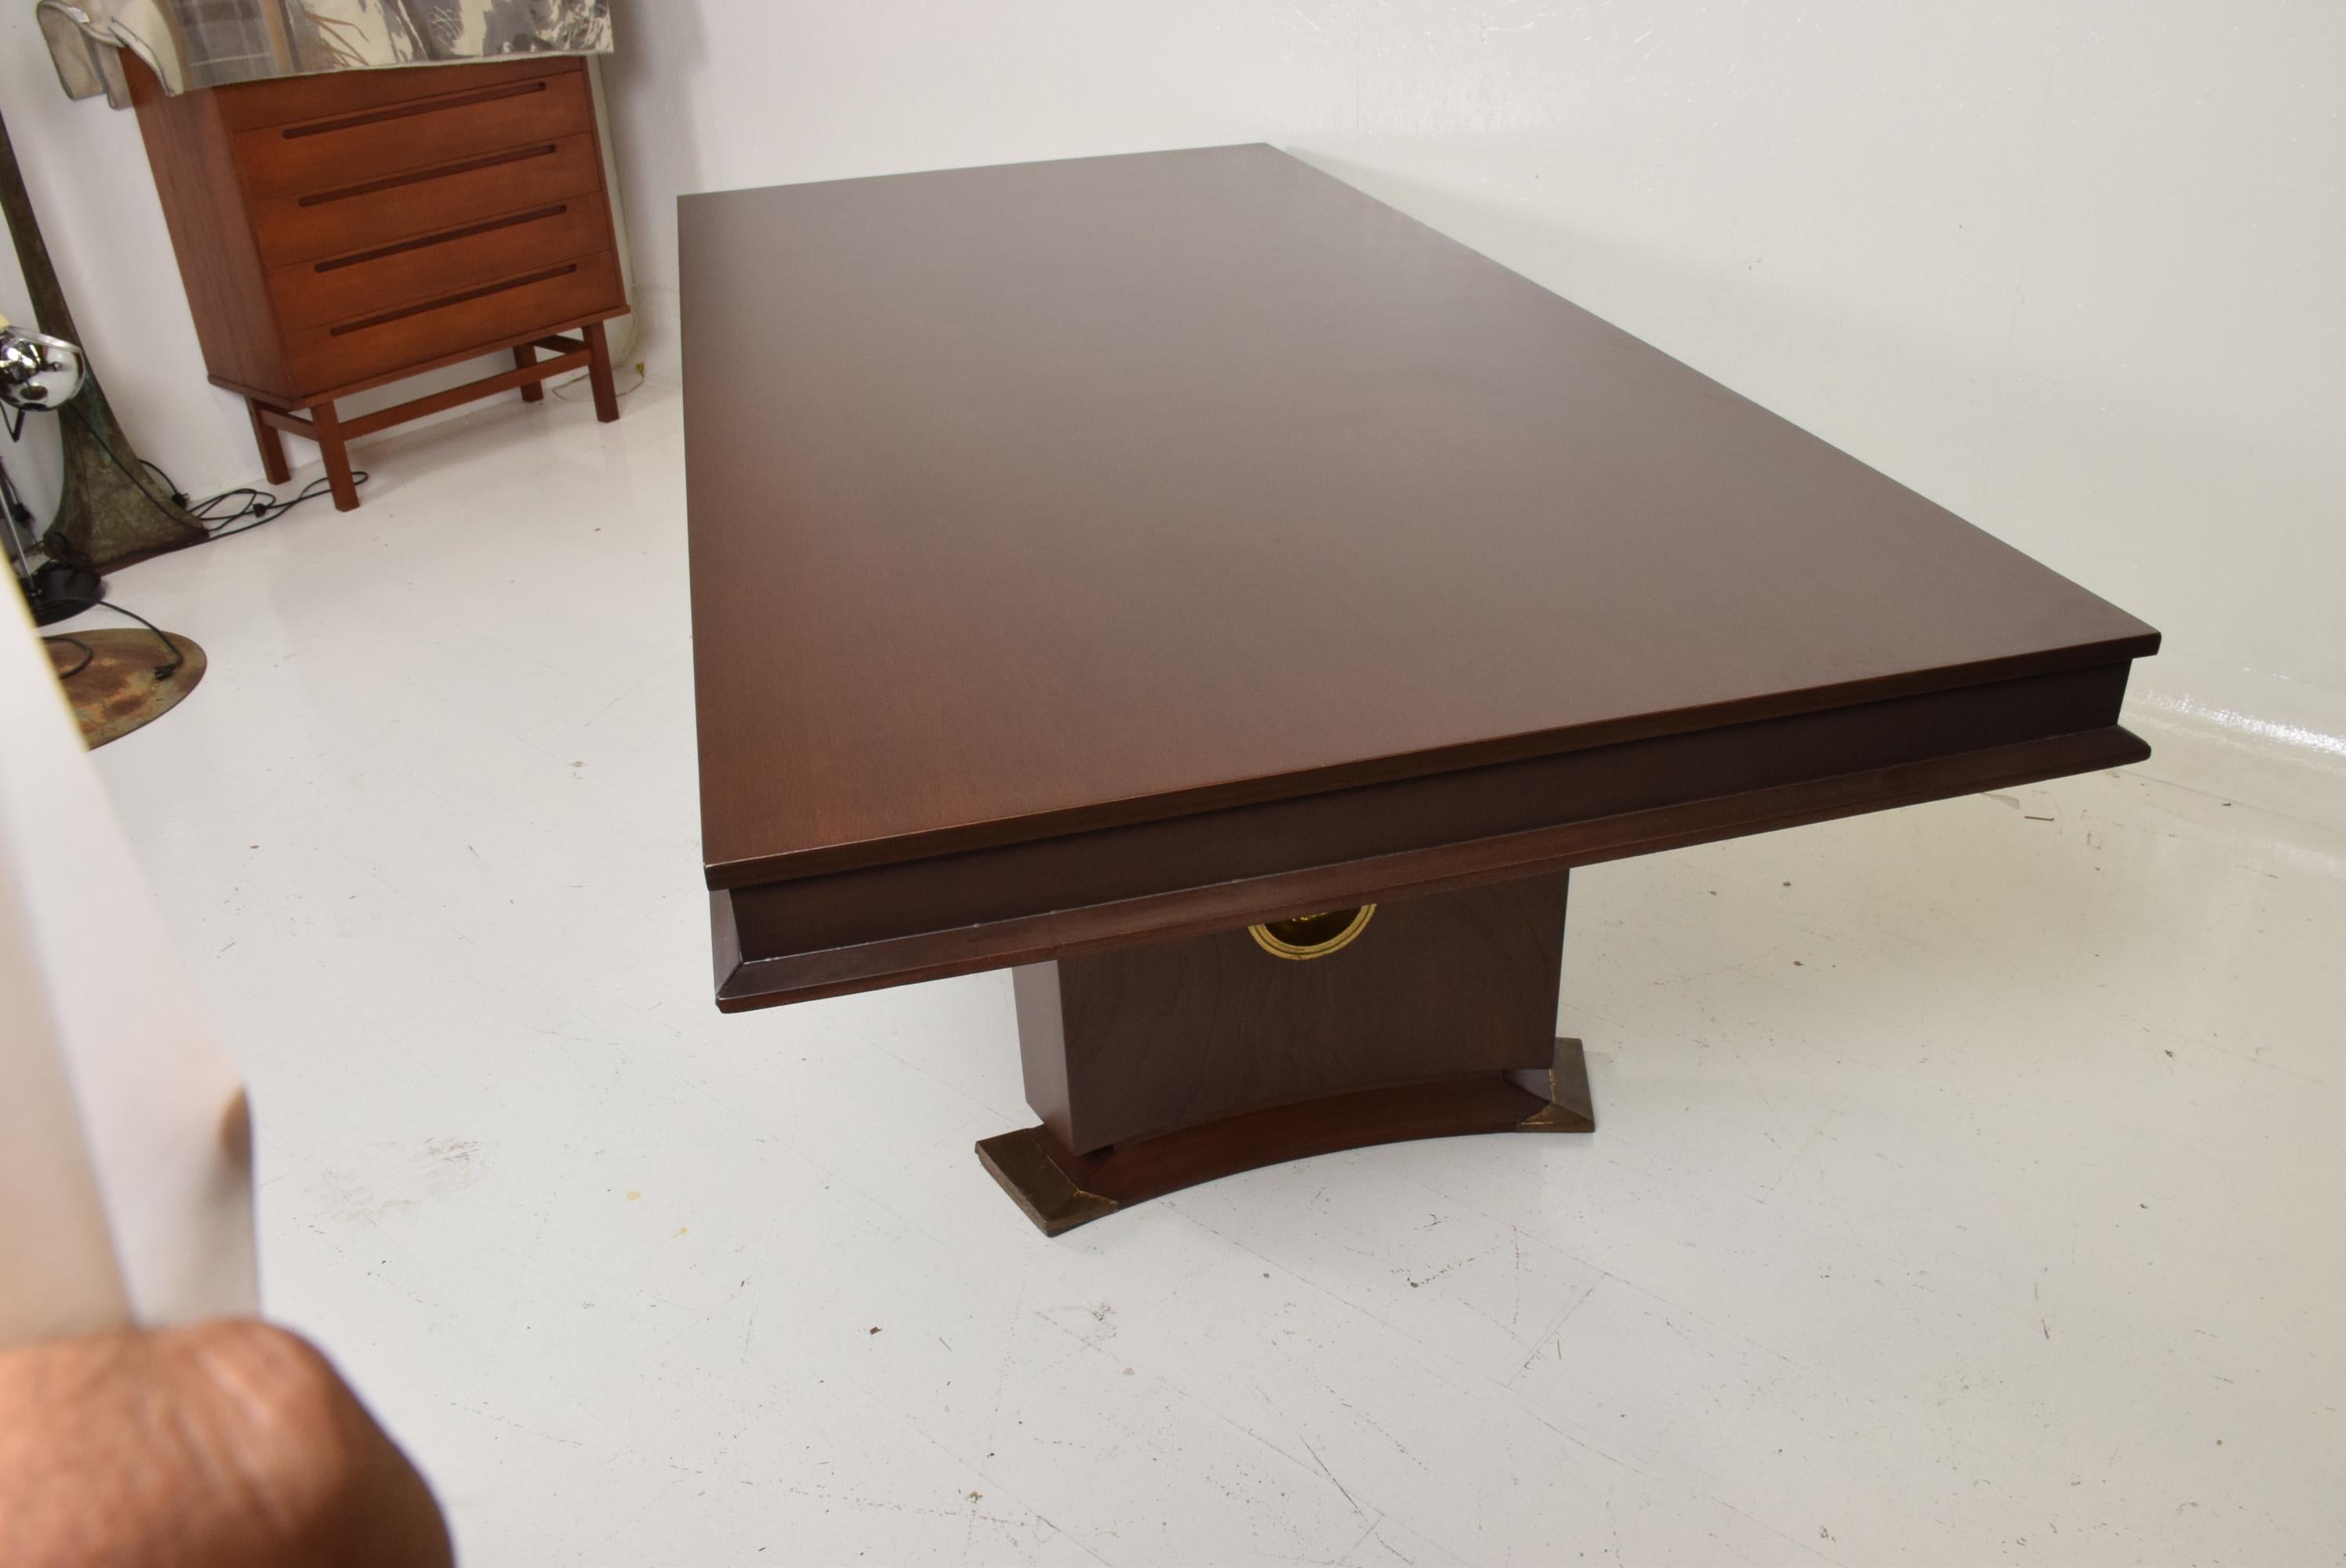 Stunning custom made mid-century Mexican modernist dining table in mahogany wood, with round patinated brass emblem on both sides of legs. Seats 8-10.  Includes two extensions.  
Made in Mexico City in the 1950's. 
Dimensions: 94.5 L x 43 3/8 W x 30